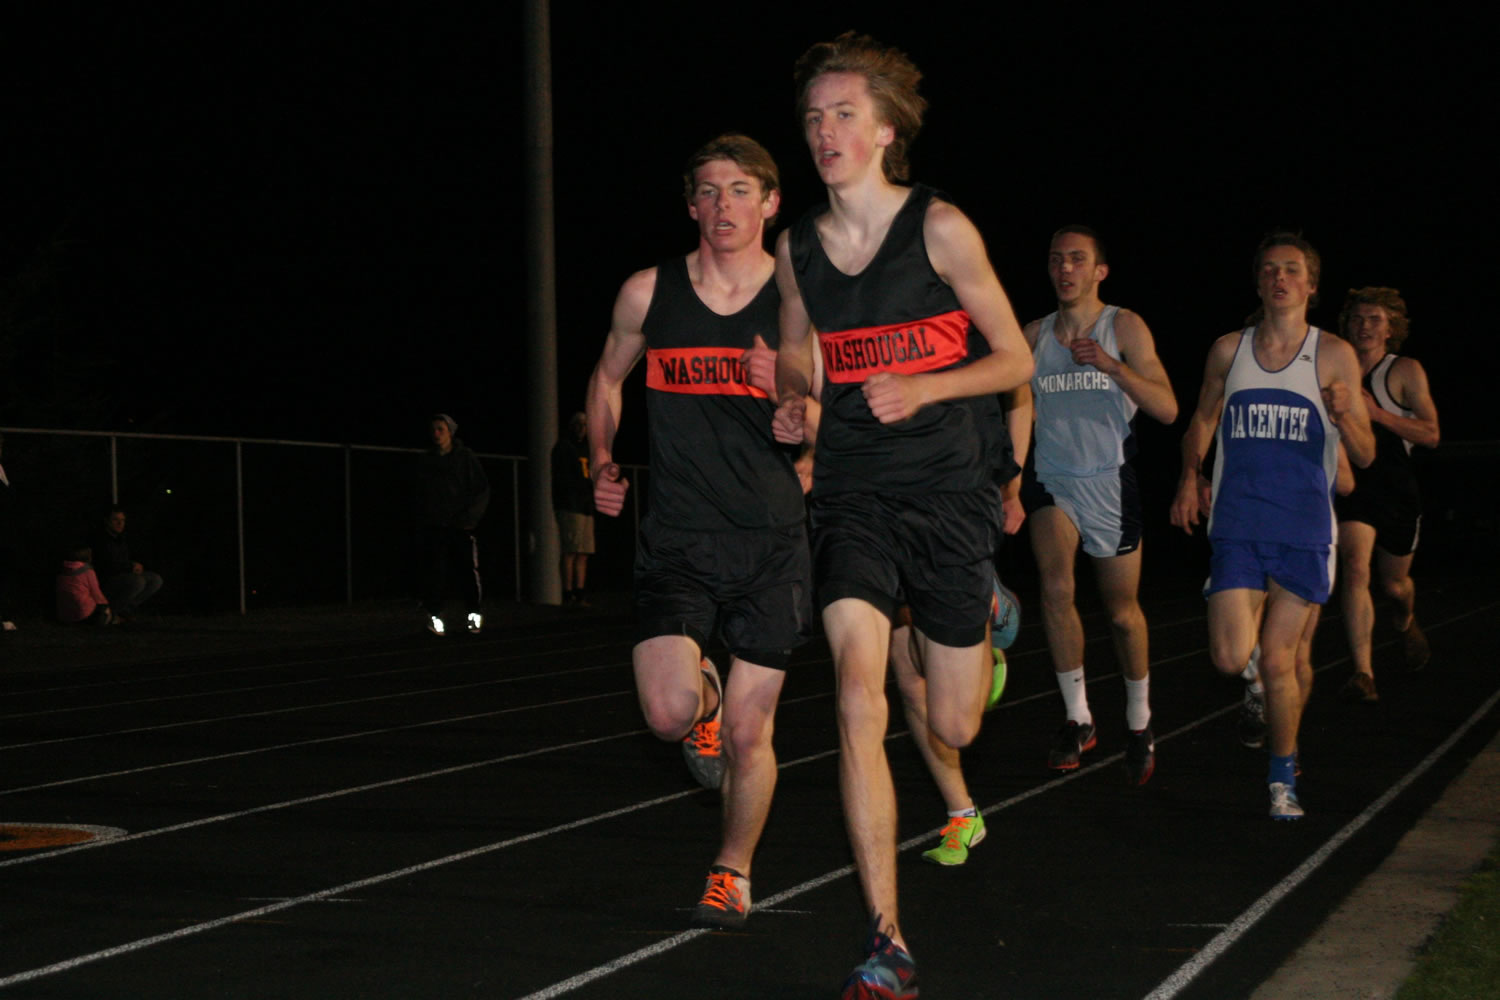 Washougal's Isaac Stinchfield (front) and Sean Eustis (left) push each other in the 3,200-meter run at the Kalama Invitational Friday. Eustis won this event with a time of 9:41.02.